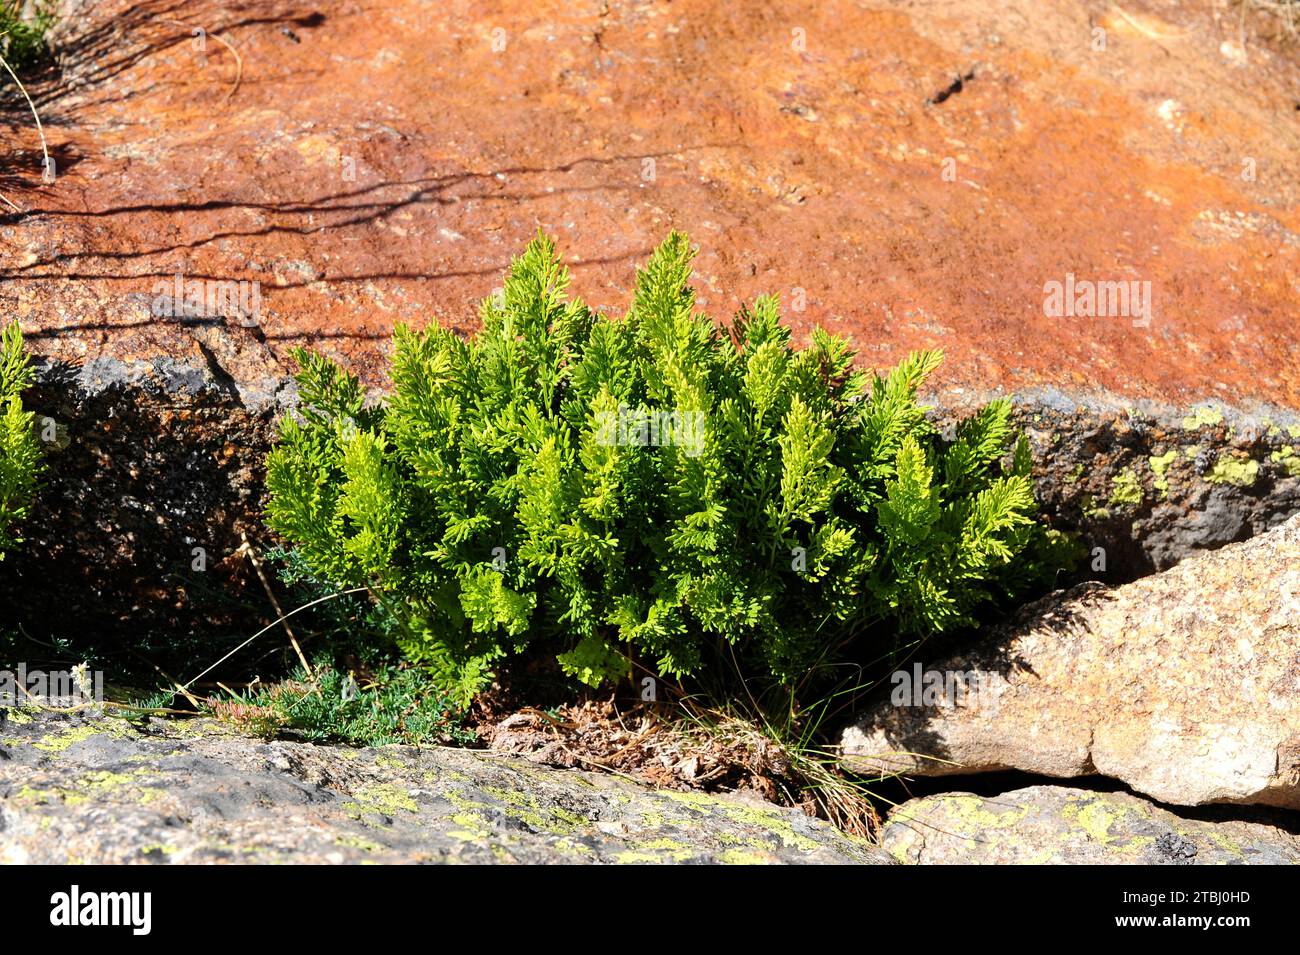 Parsley fern (Cryptogramma crispa) is a fern native to northern Europe and central and southern Europe mountains. This photo was taken in Sierra de Gr Stock Photo